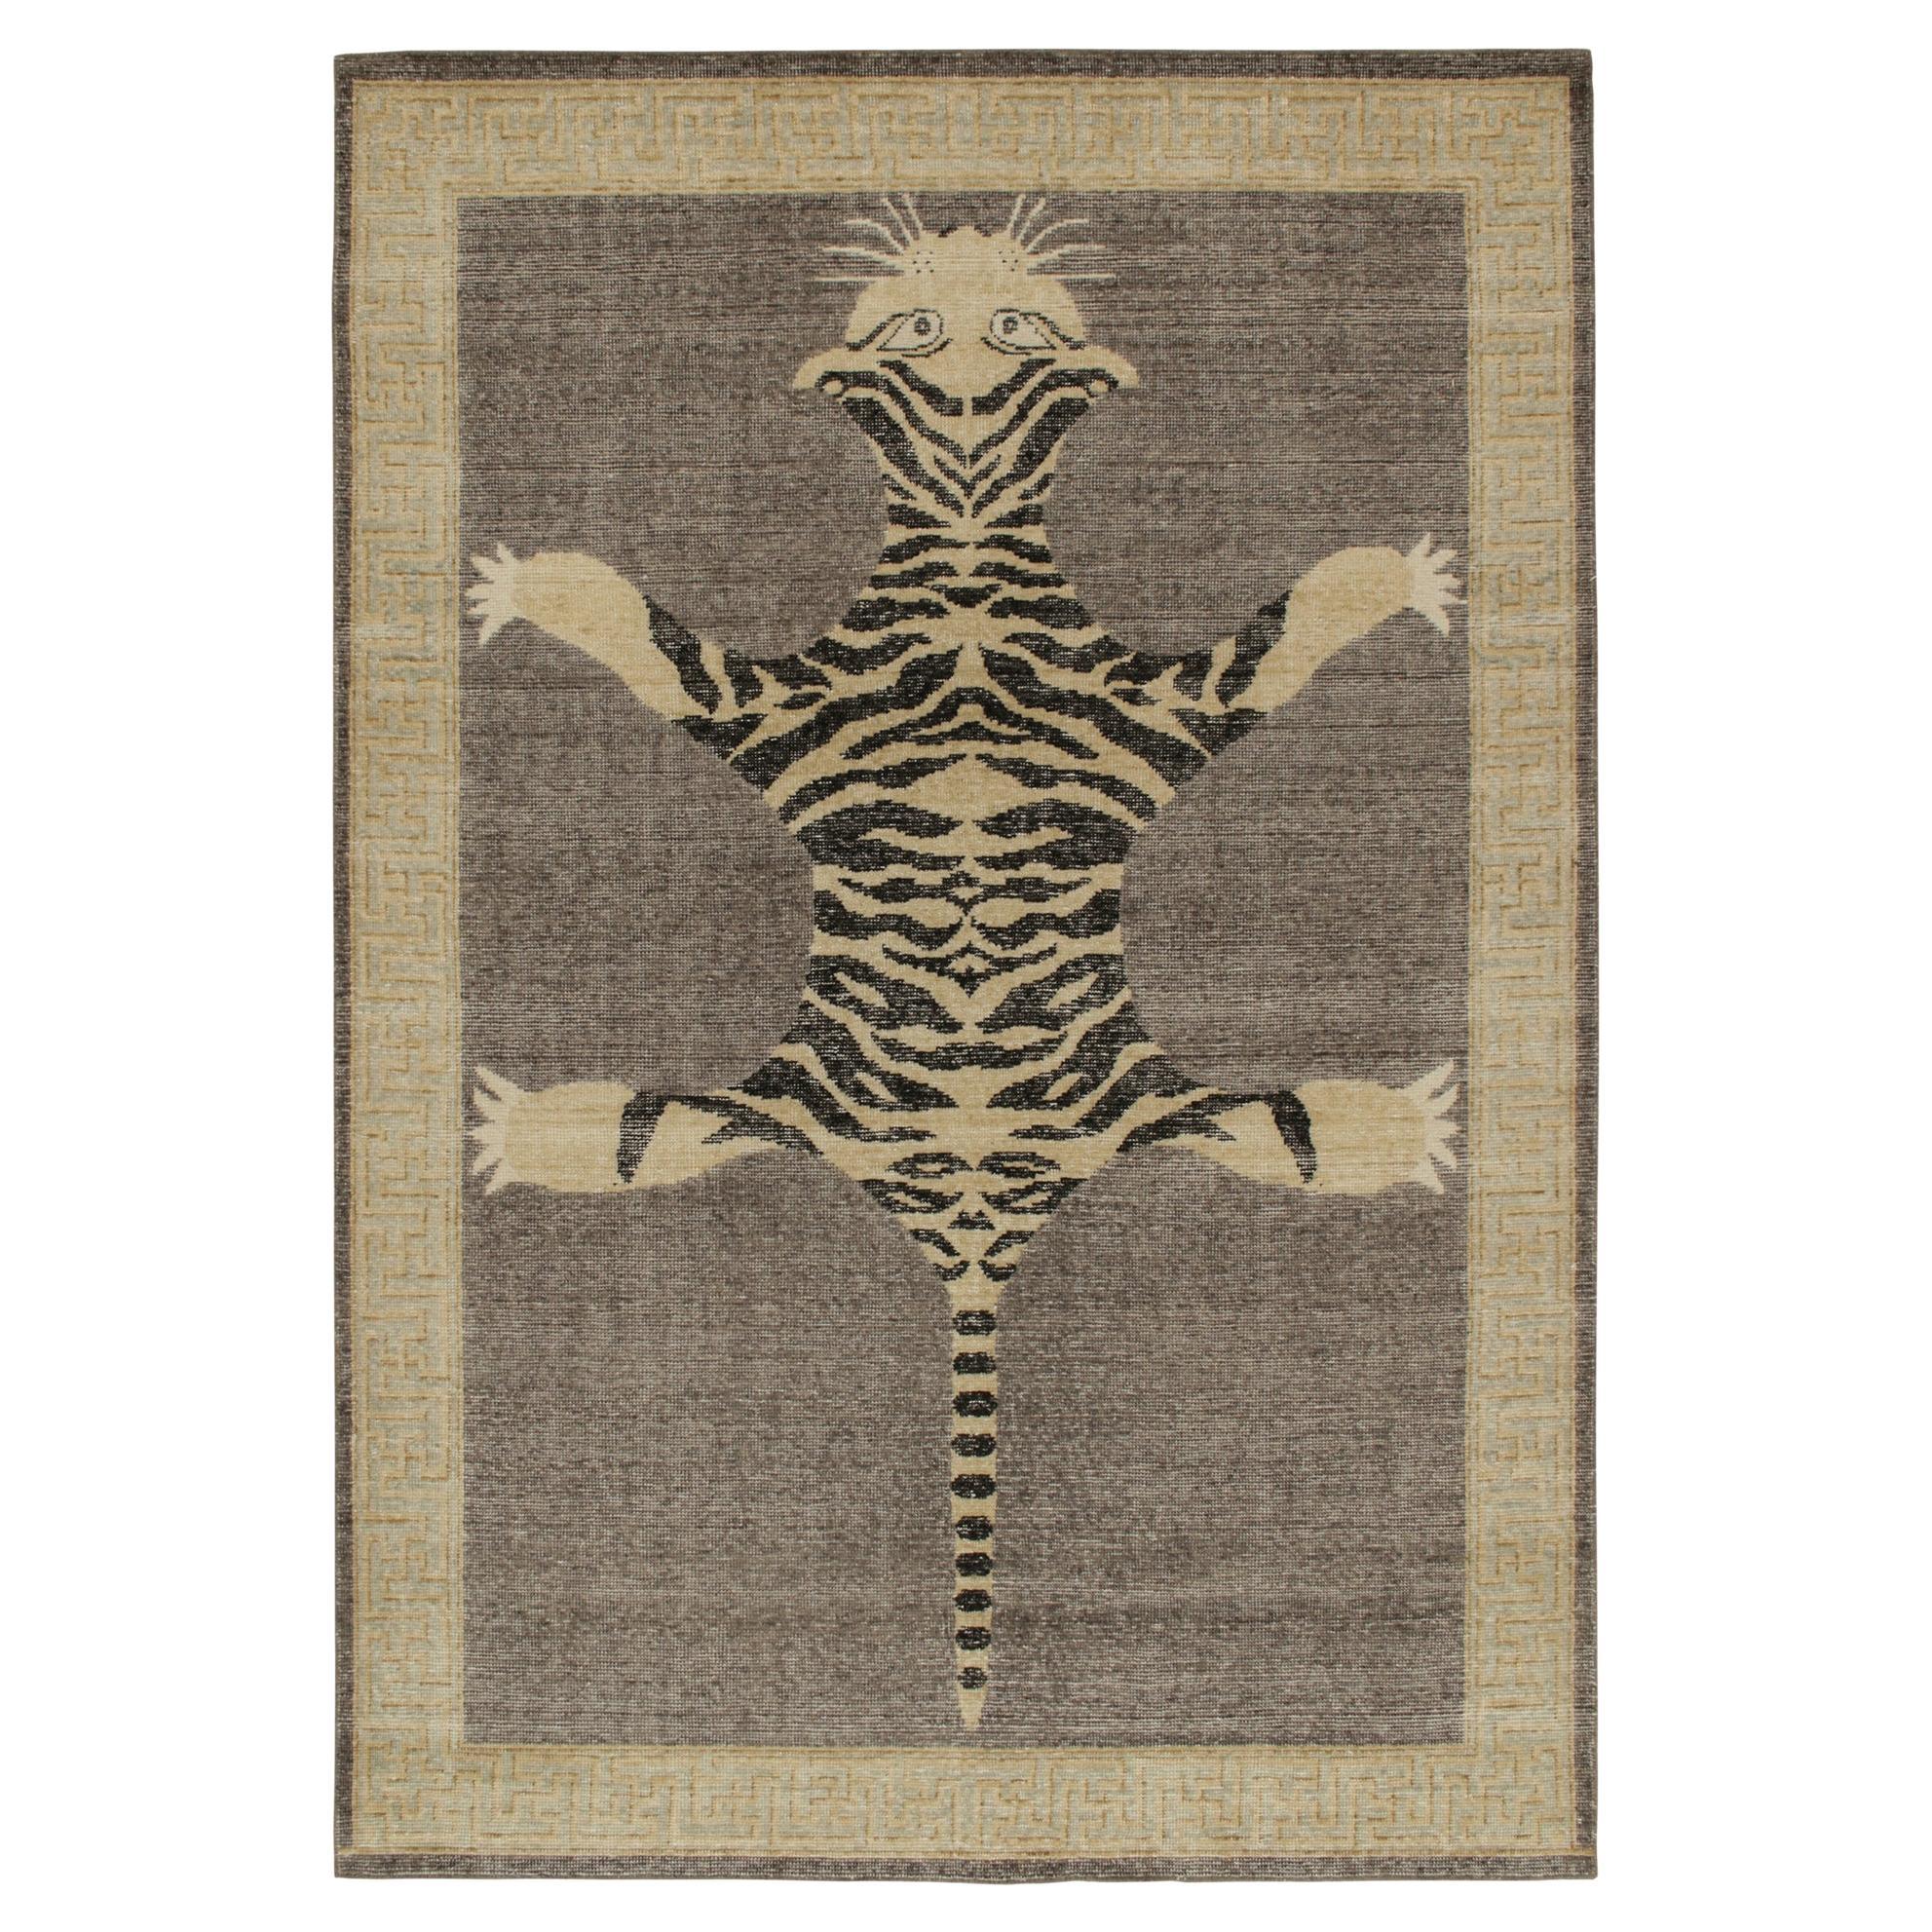 Rug & Kilim’s Distressed Style Tiger Skin Rug in Gray, Beige and Black Pictorial